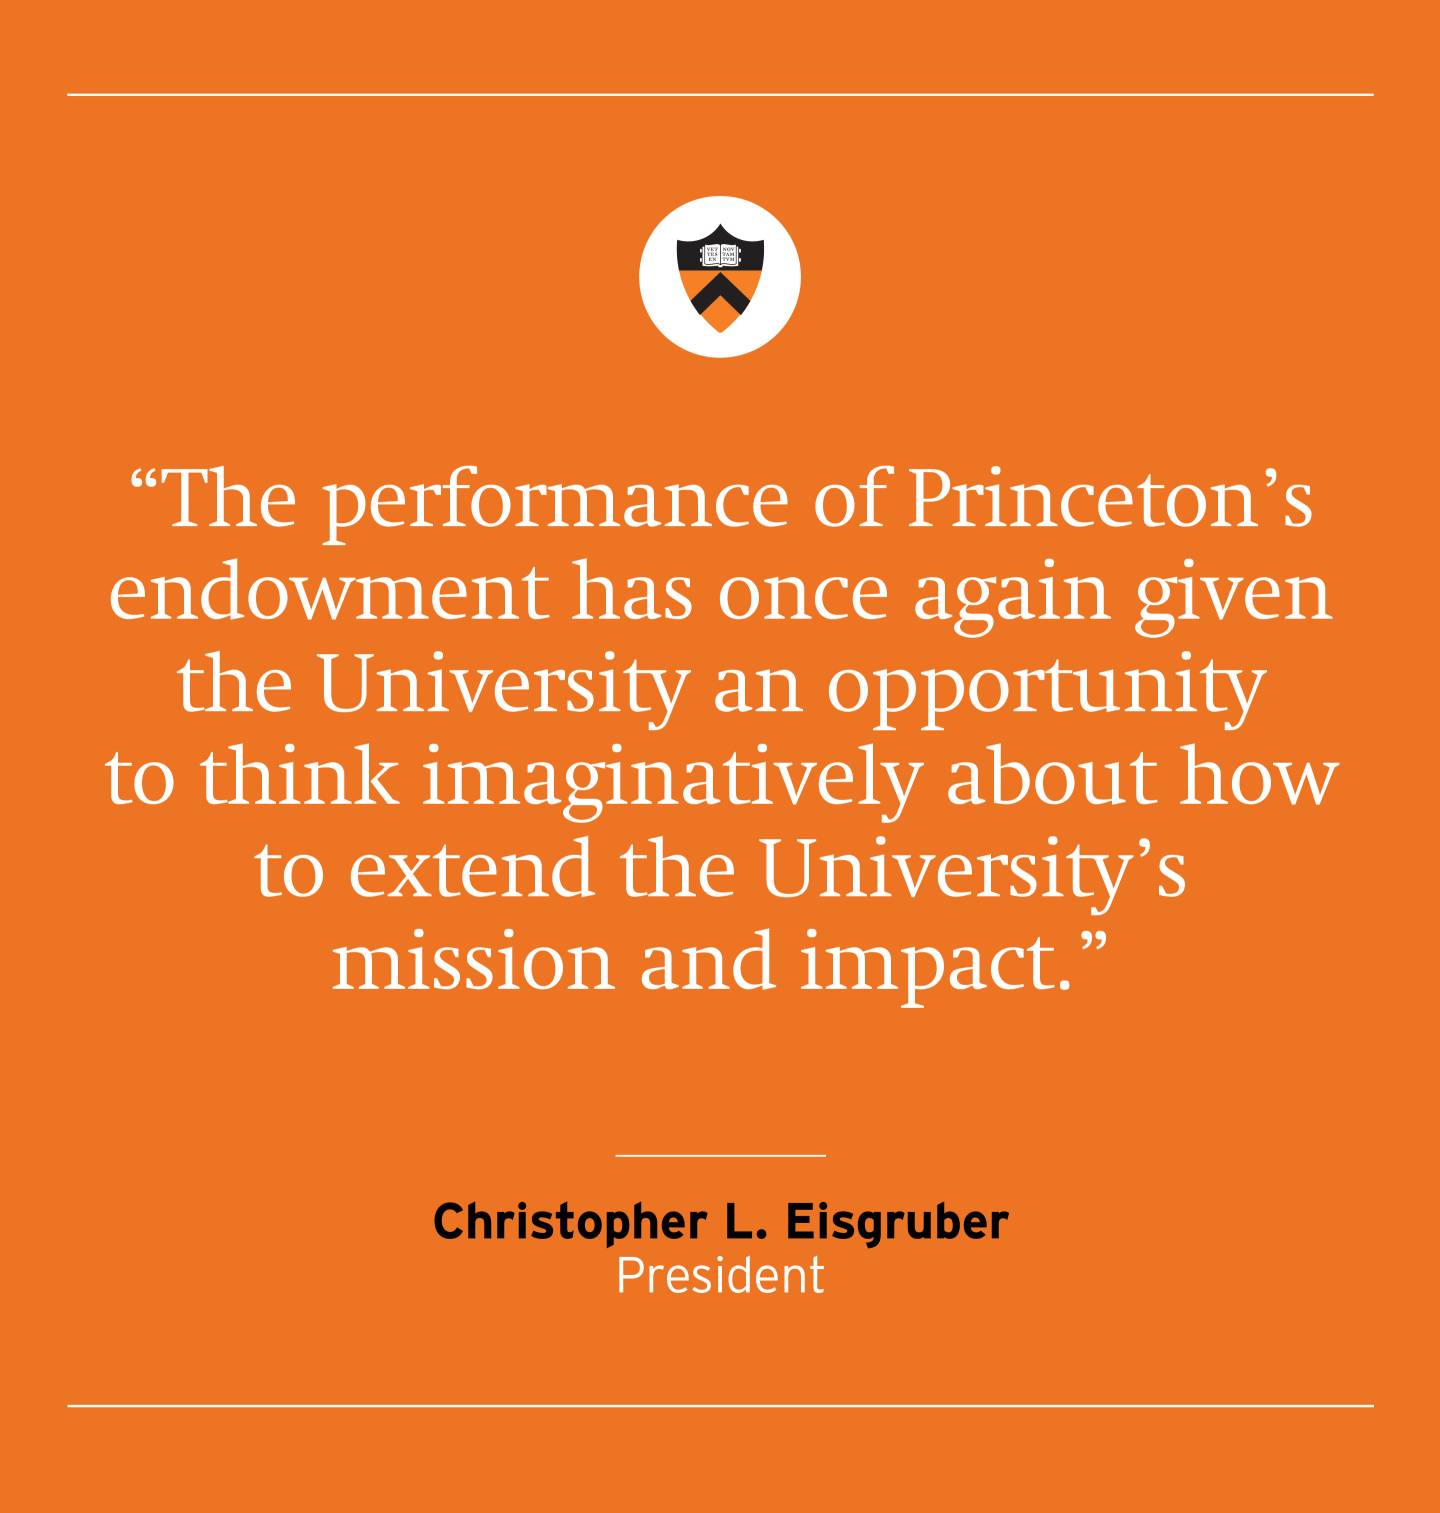 Quote card: “The performance of Princeton’s endowment has once again given the University an opportunity to think imaginatively about how to extend the University’s mission and impact.” said Christopher L. Eisgruber, President